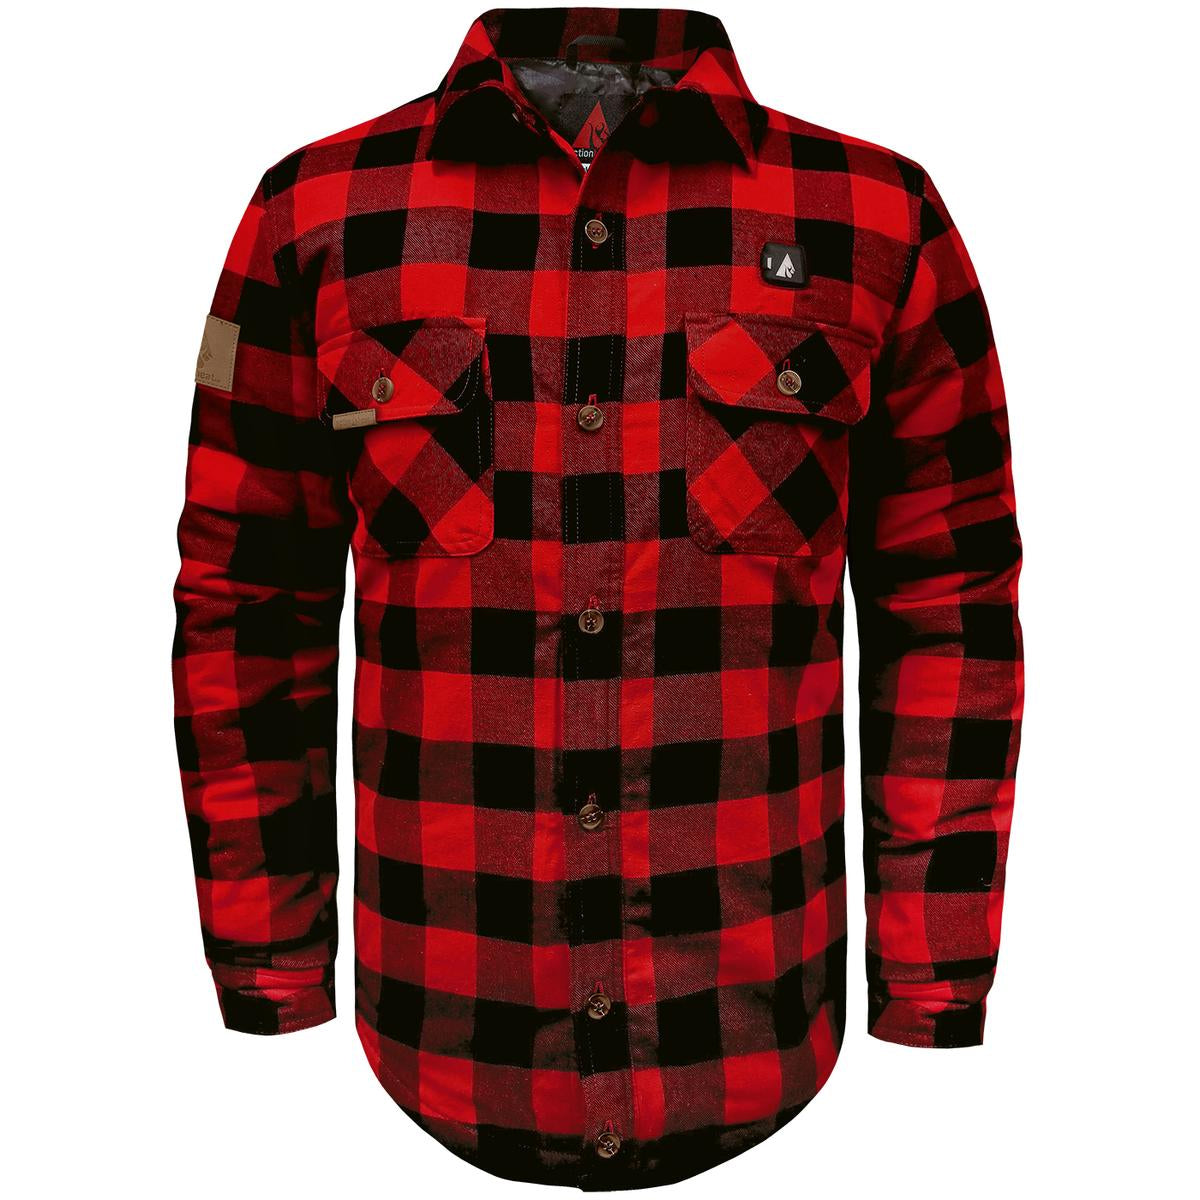 ActionHeat 5V Battery Heated Flannel Shirt – ActionHeat Heated Apparel